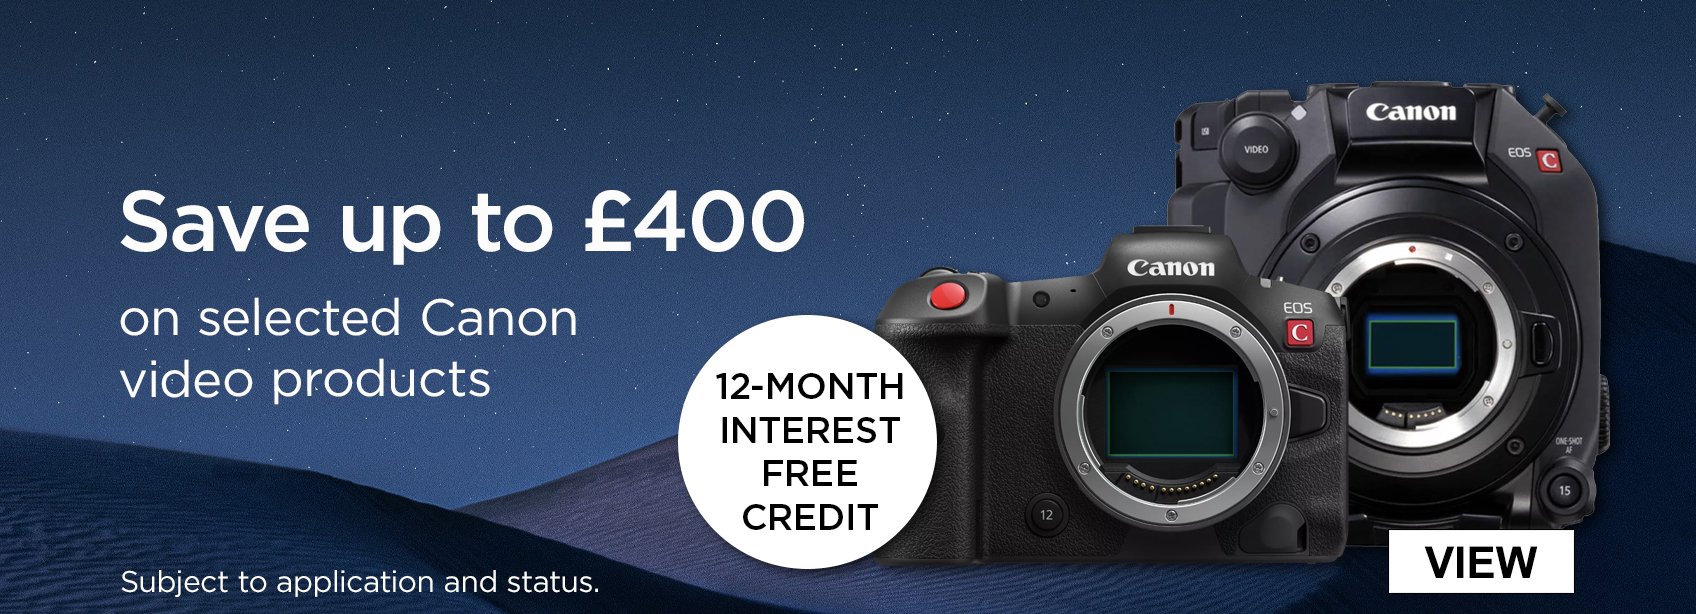 Save up to £400 on selected Canon Video Products. 12 month interest free credit subject to application and status